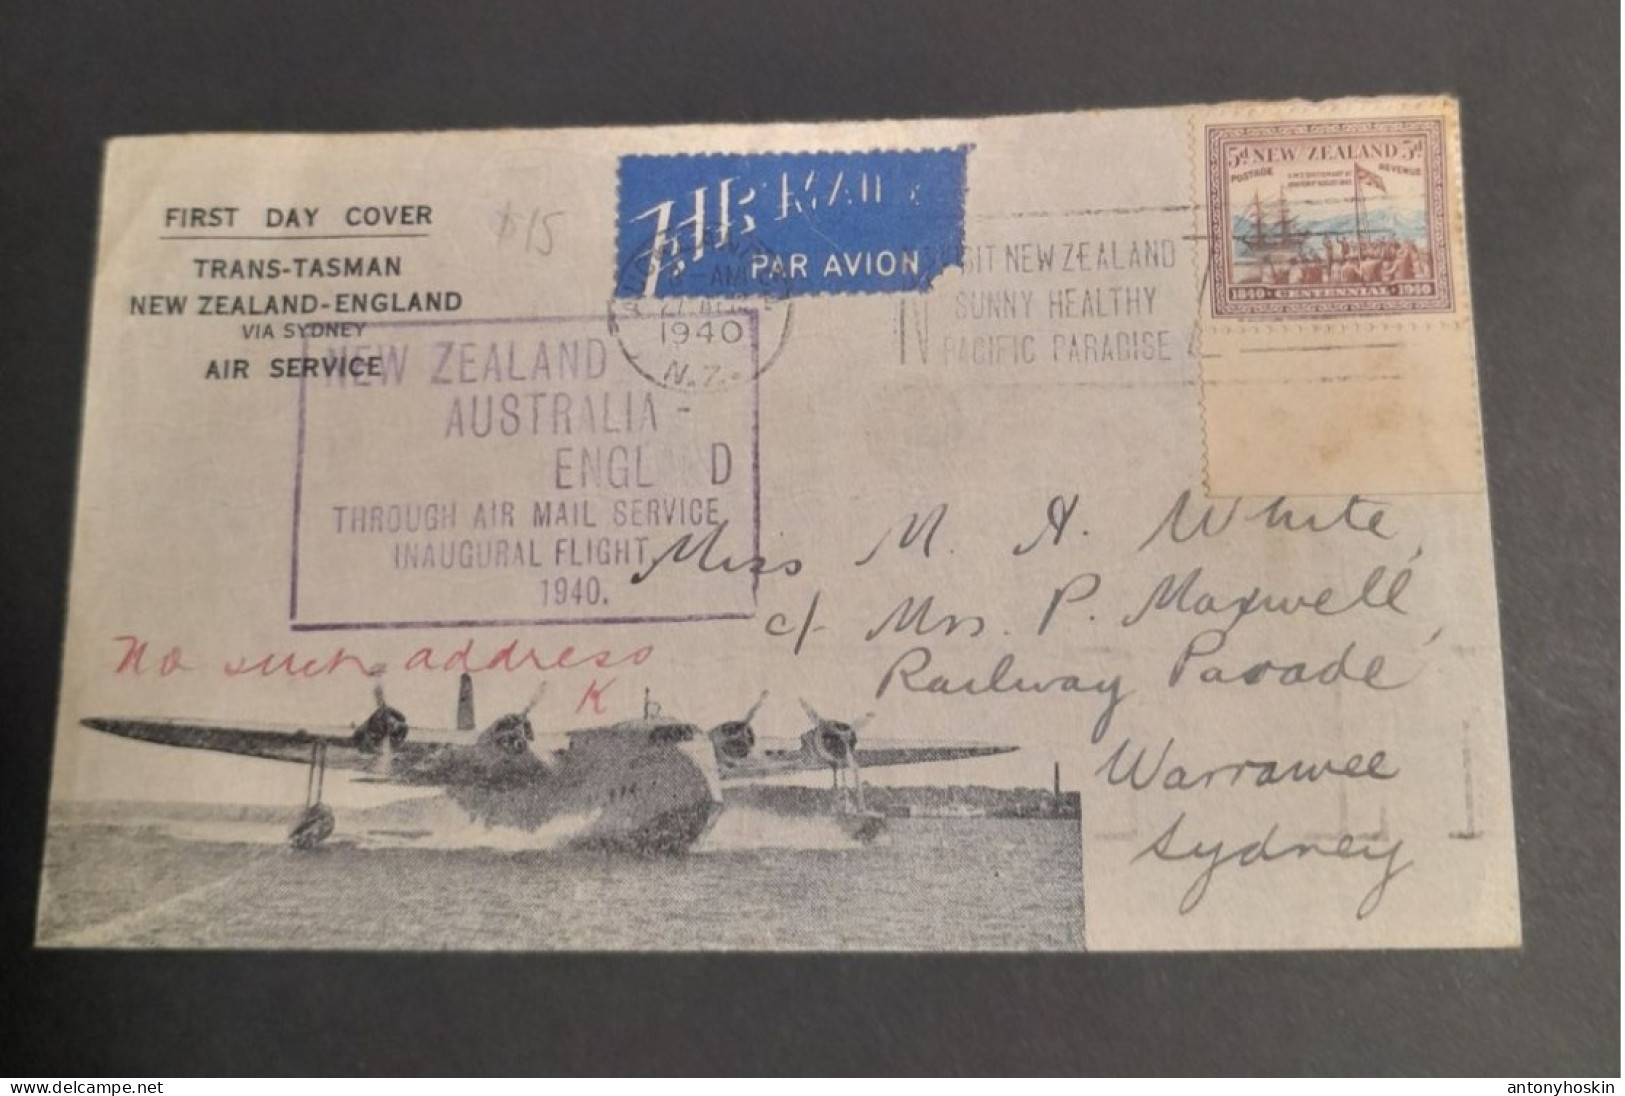 27 April 1940 New Zealand - Australia -England First Day Cover - Luchtpost